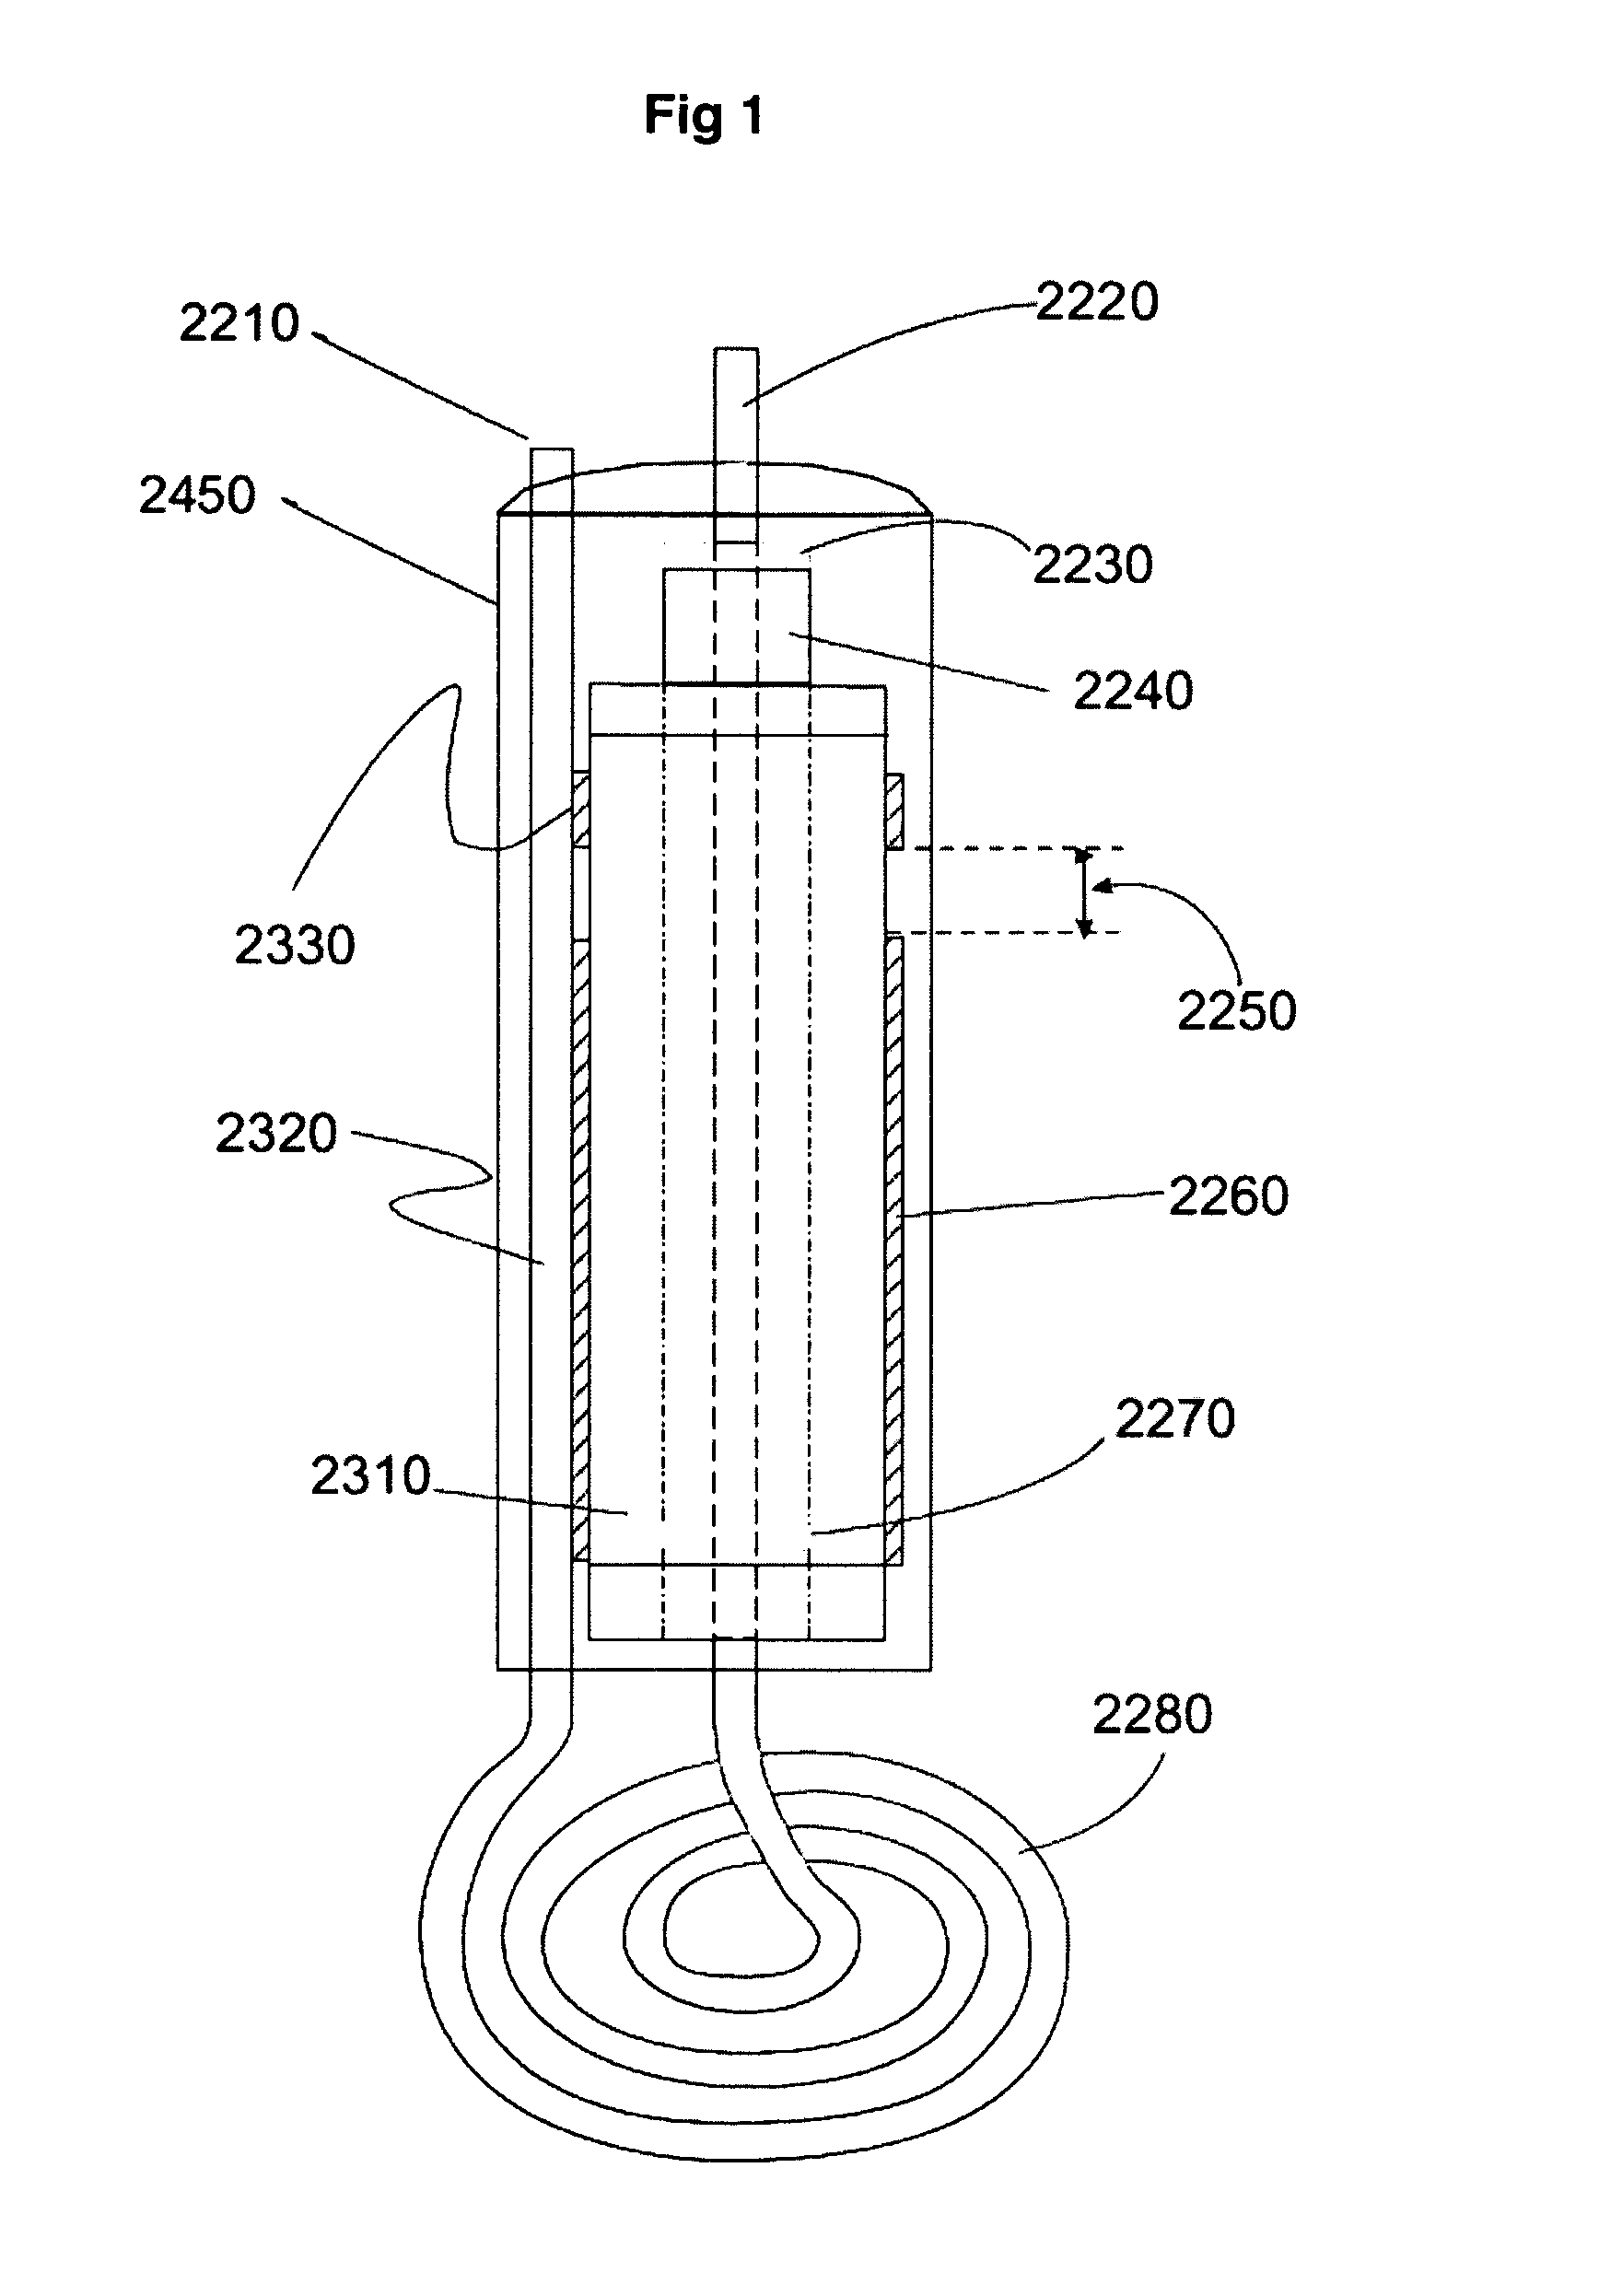 Inductive heating of tissues using alternating magnetic fields and uses thereof